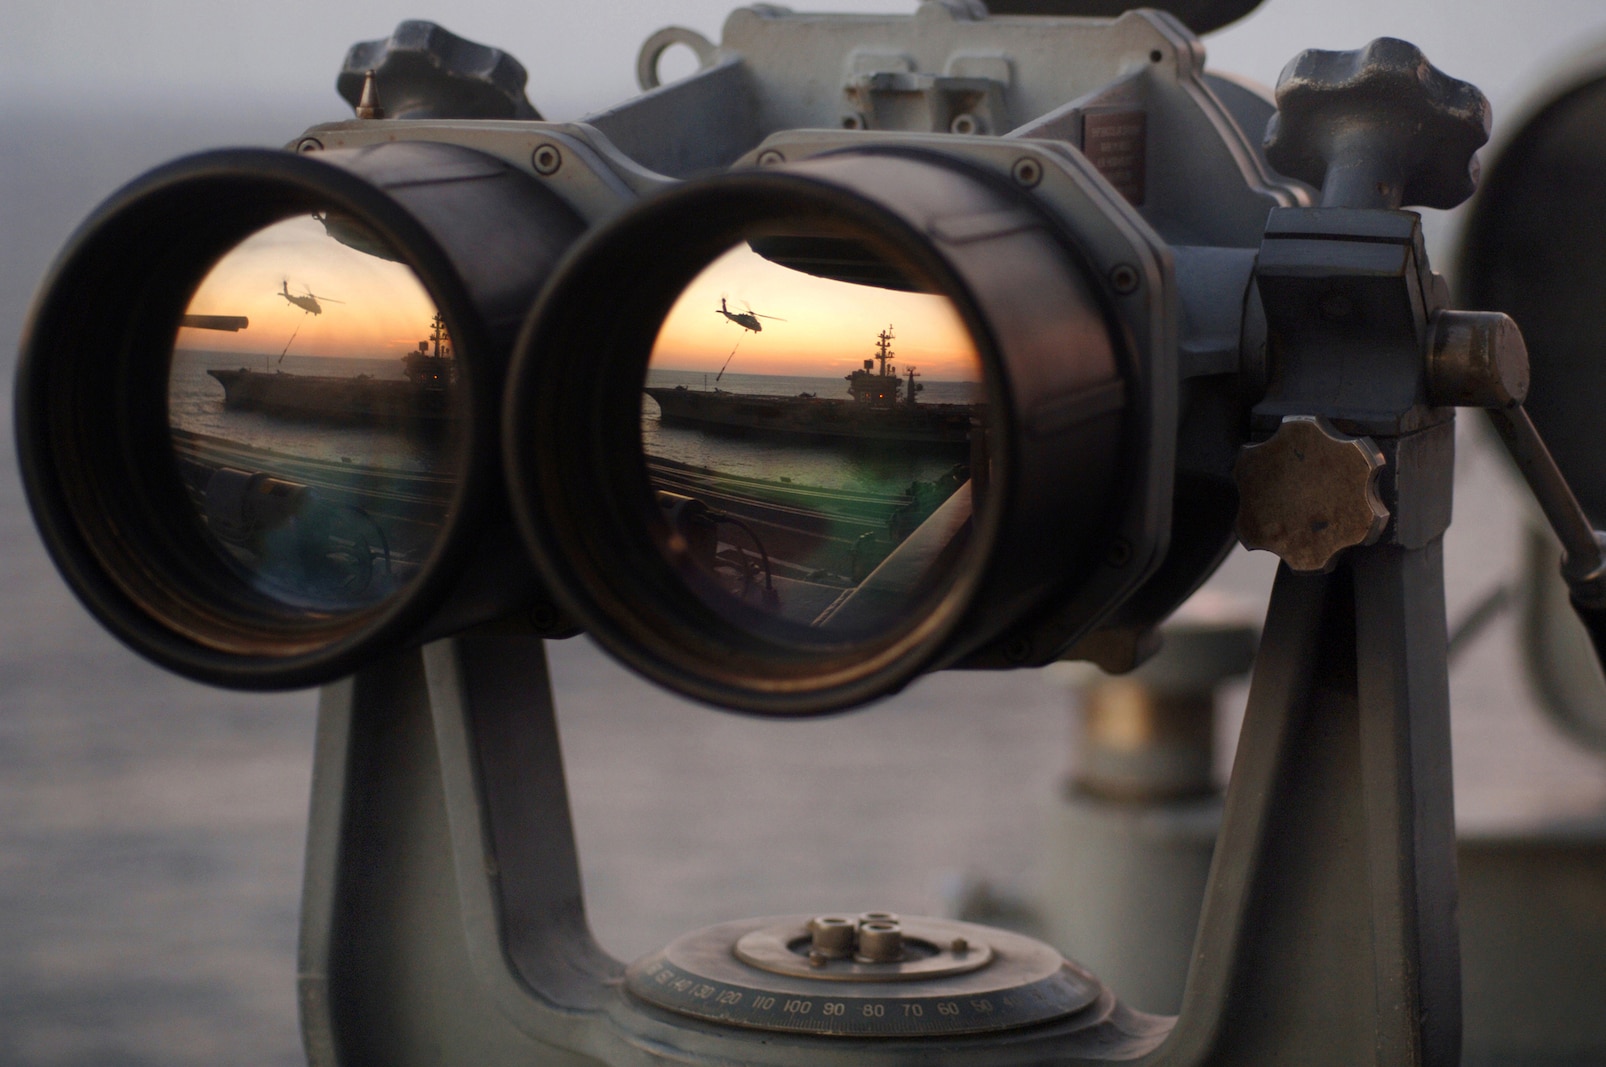 The Nimitz-class aircraft carrier USS Dwight D. Eisenhower (CVN 69) is reflected in a set of "Big Eyes" binoculars on the signal bridge of the Nimitz-class aircraft carrier USS Harry S. Truman (CVN 75). Truman and Eisenhower are currently underway in the Atlantic Ocean conducting ammunition offloads and underway replenishments. U.S. Navy photo by Photographer's Mate Airman Ricardo J. Reyes